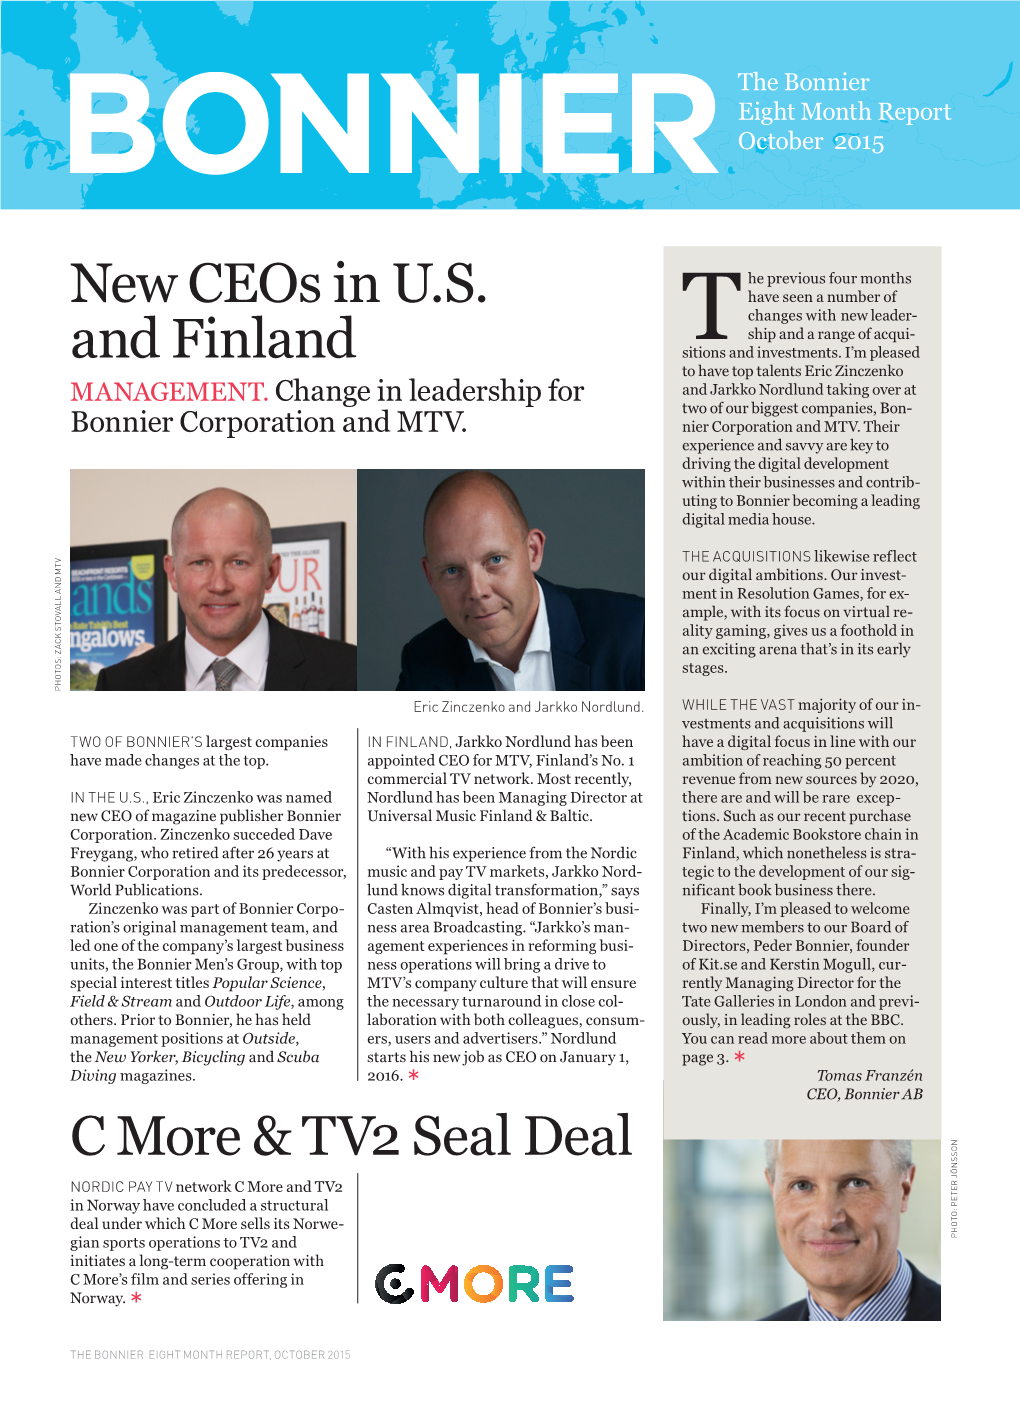 New Ceos in U.S. and Finland C More & TV2 Seal Deal